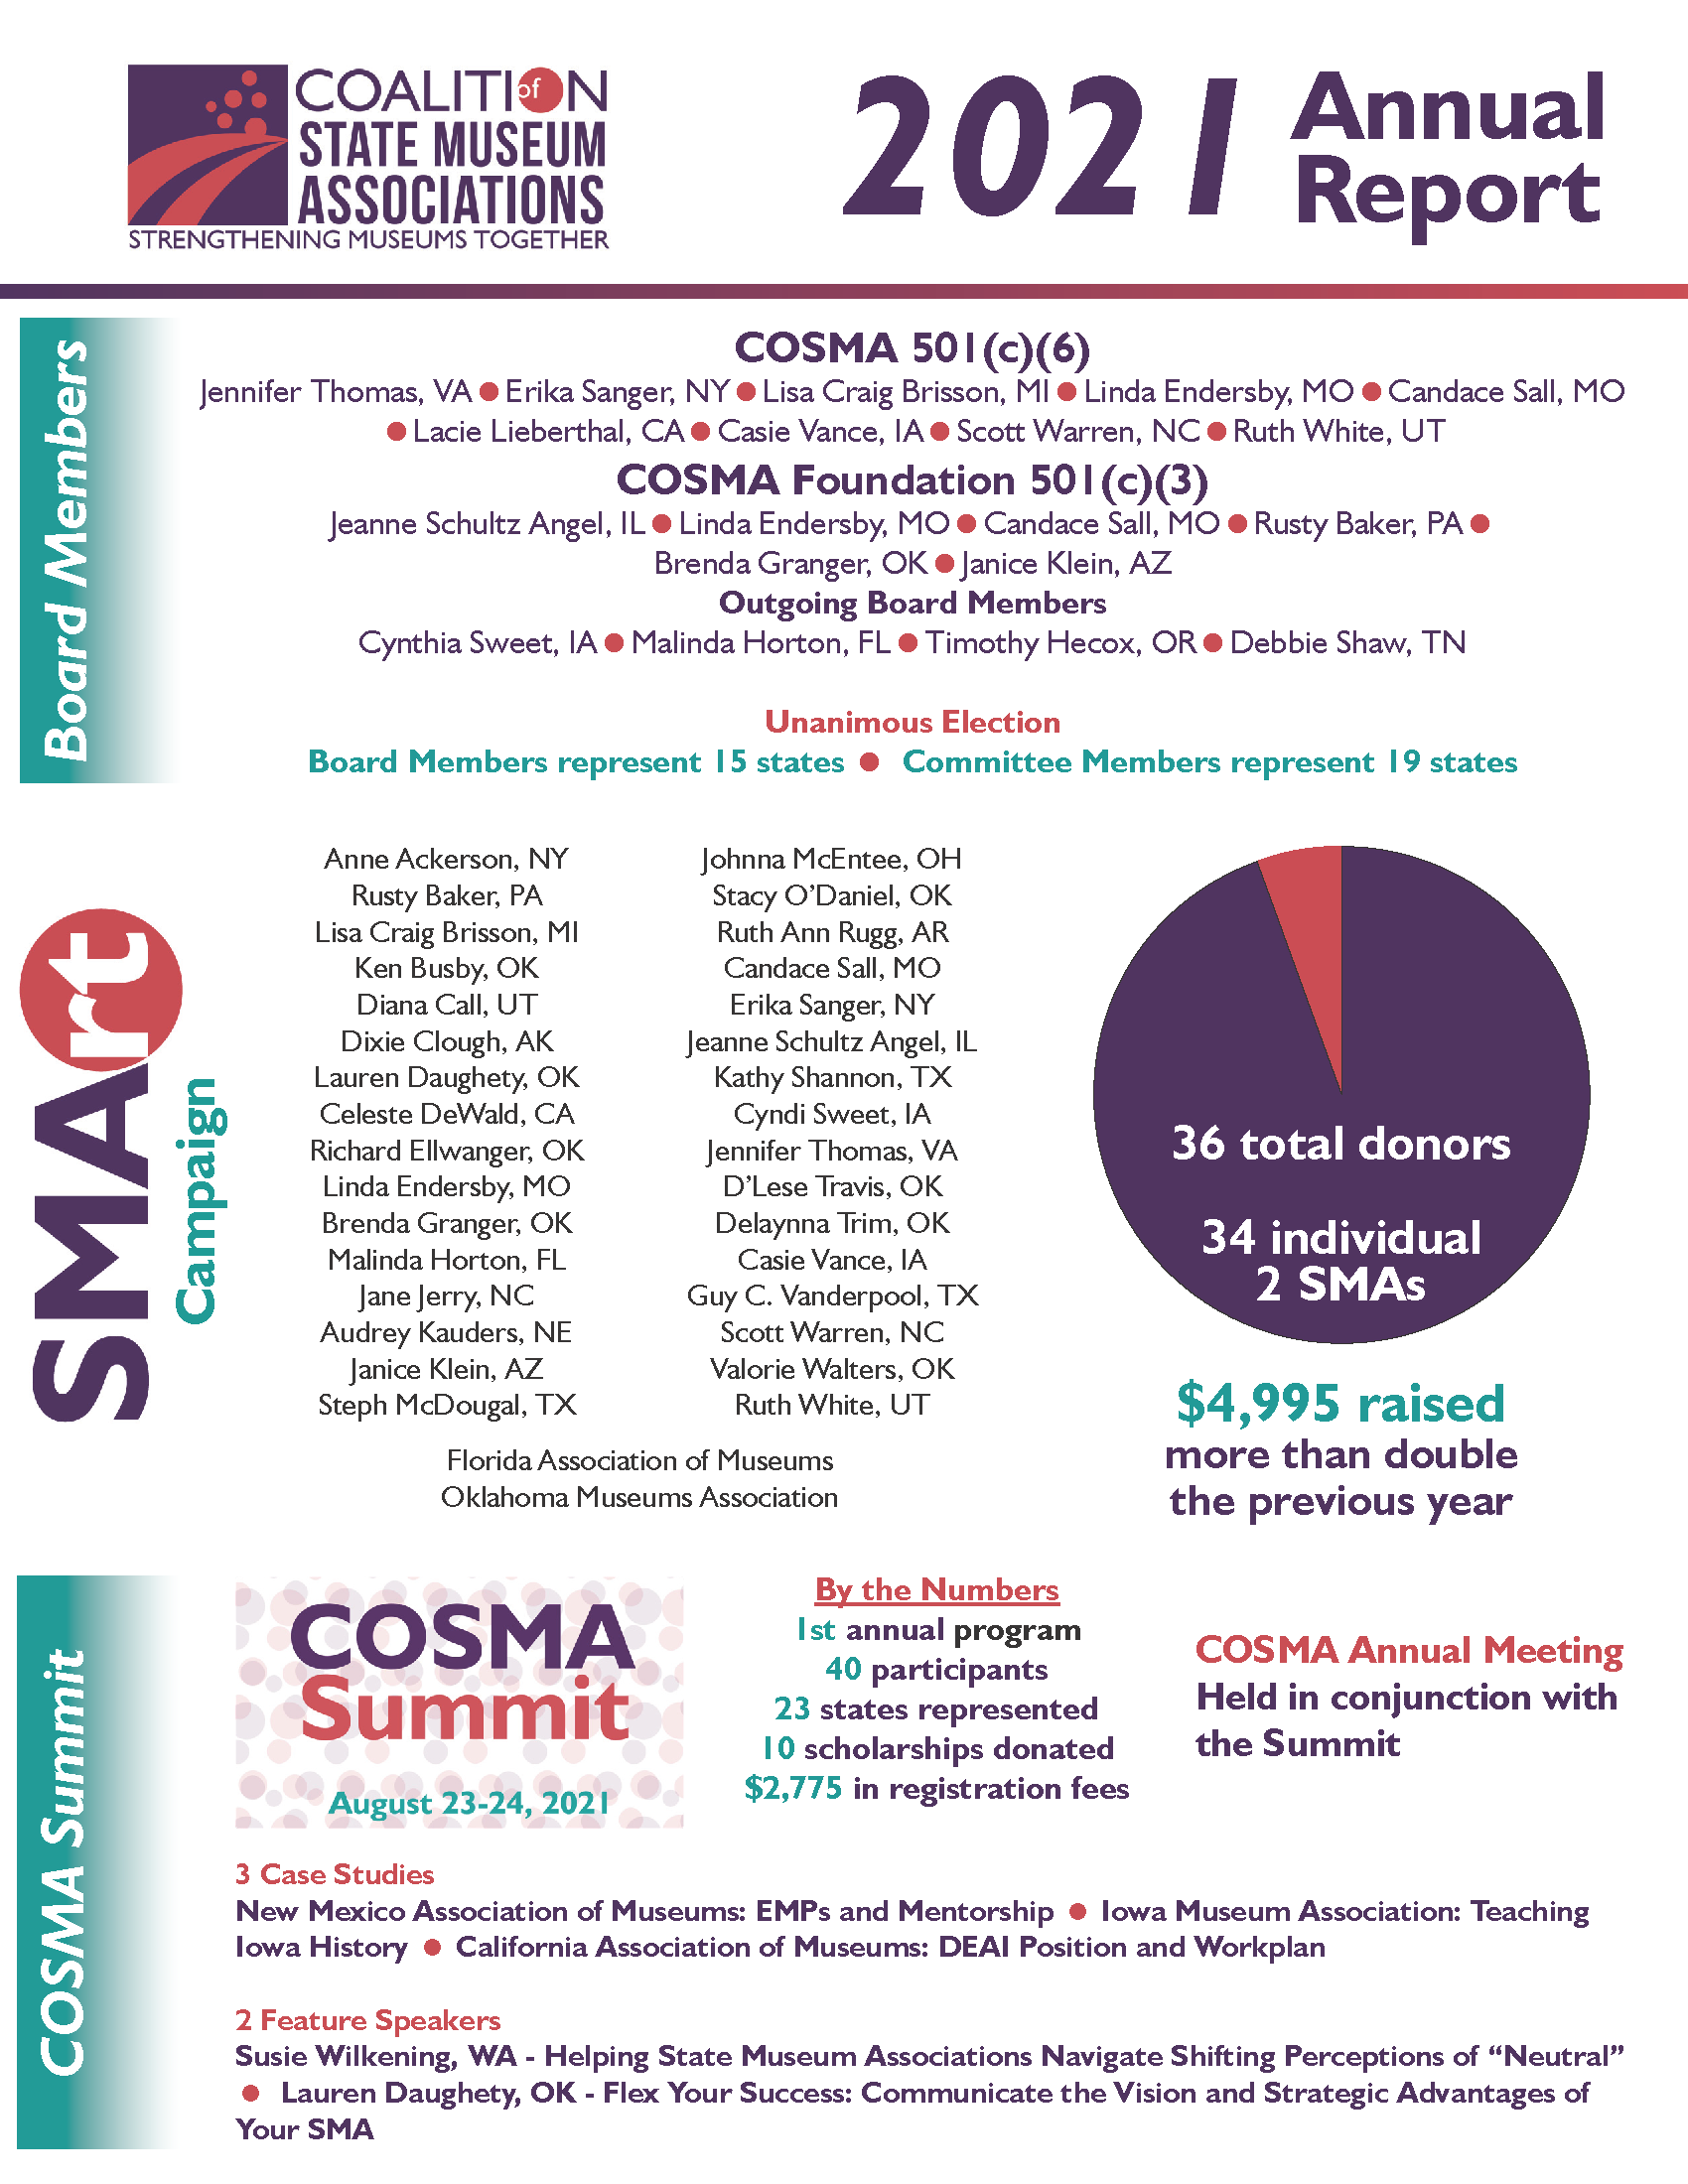 COSMA 2021 Annual Report FINAL_Page_1